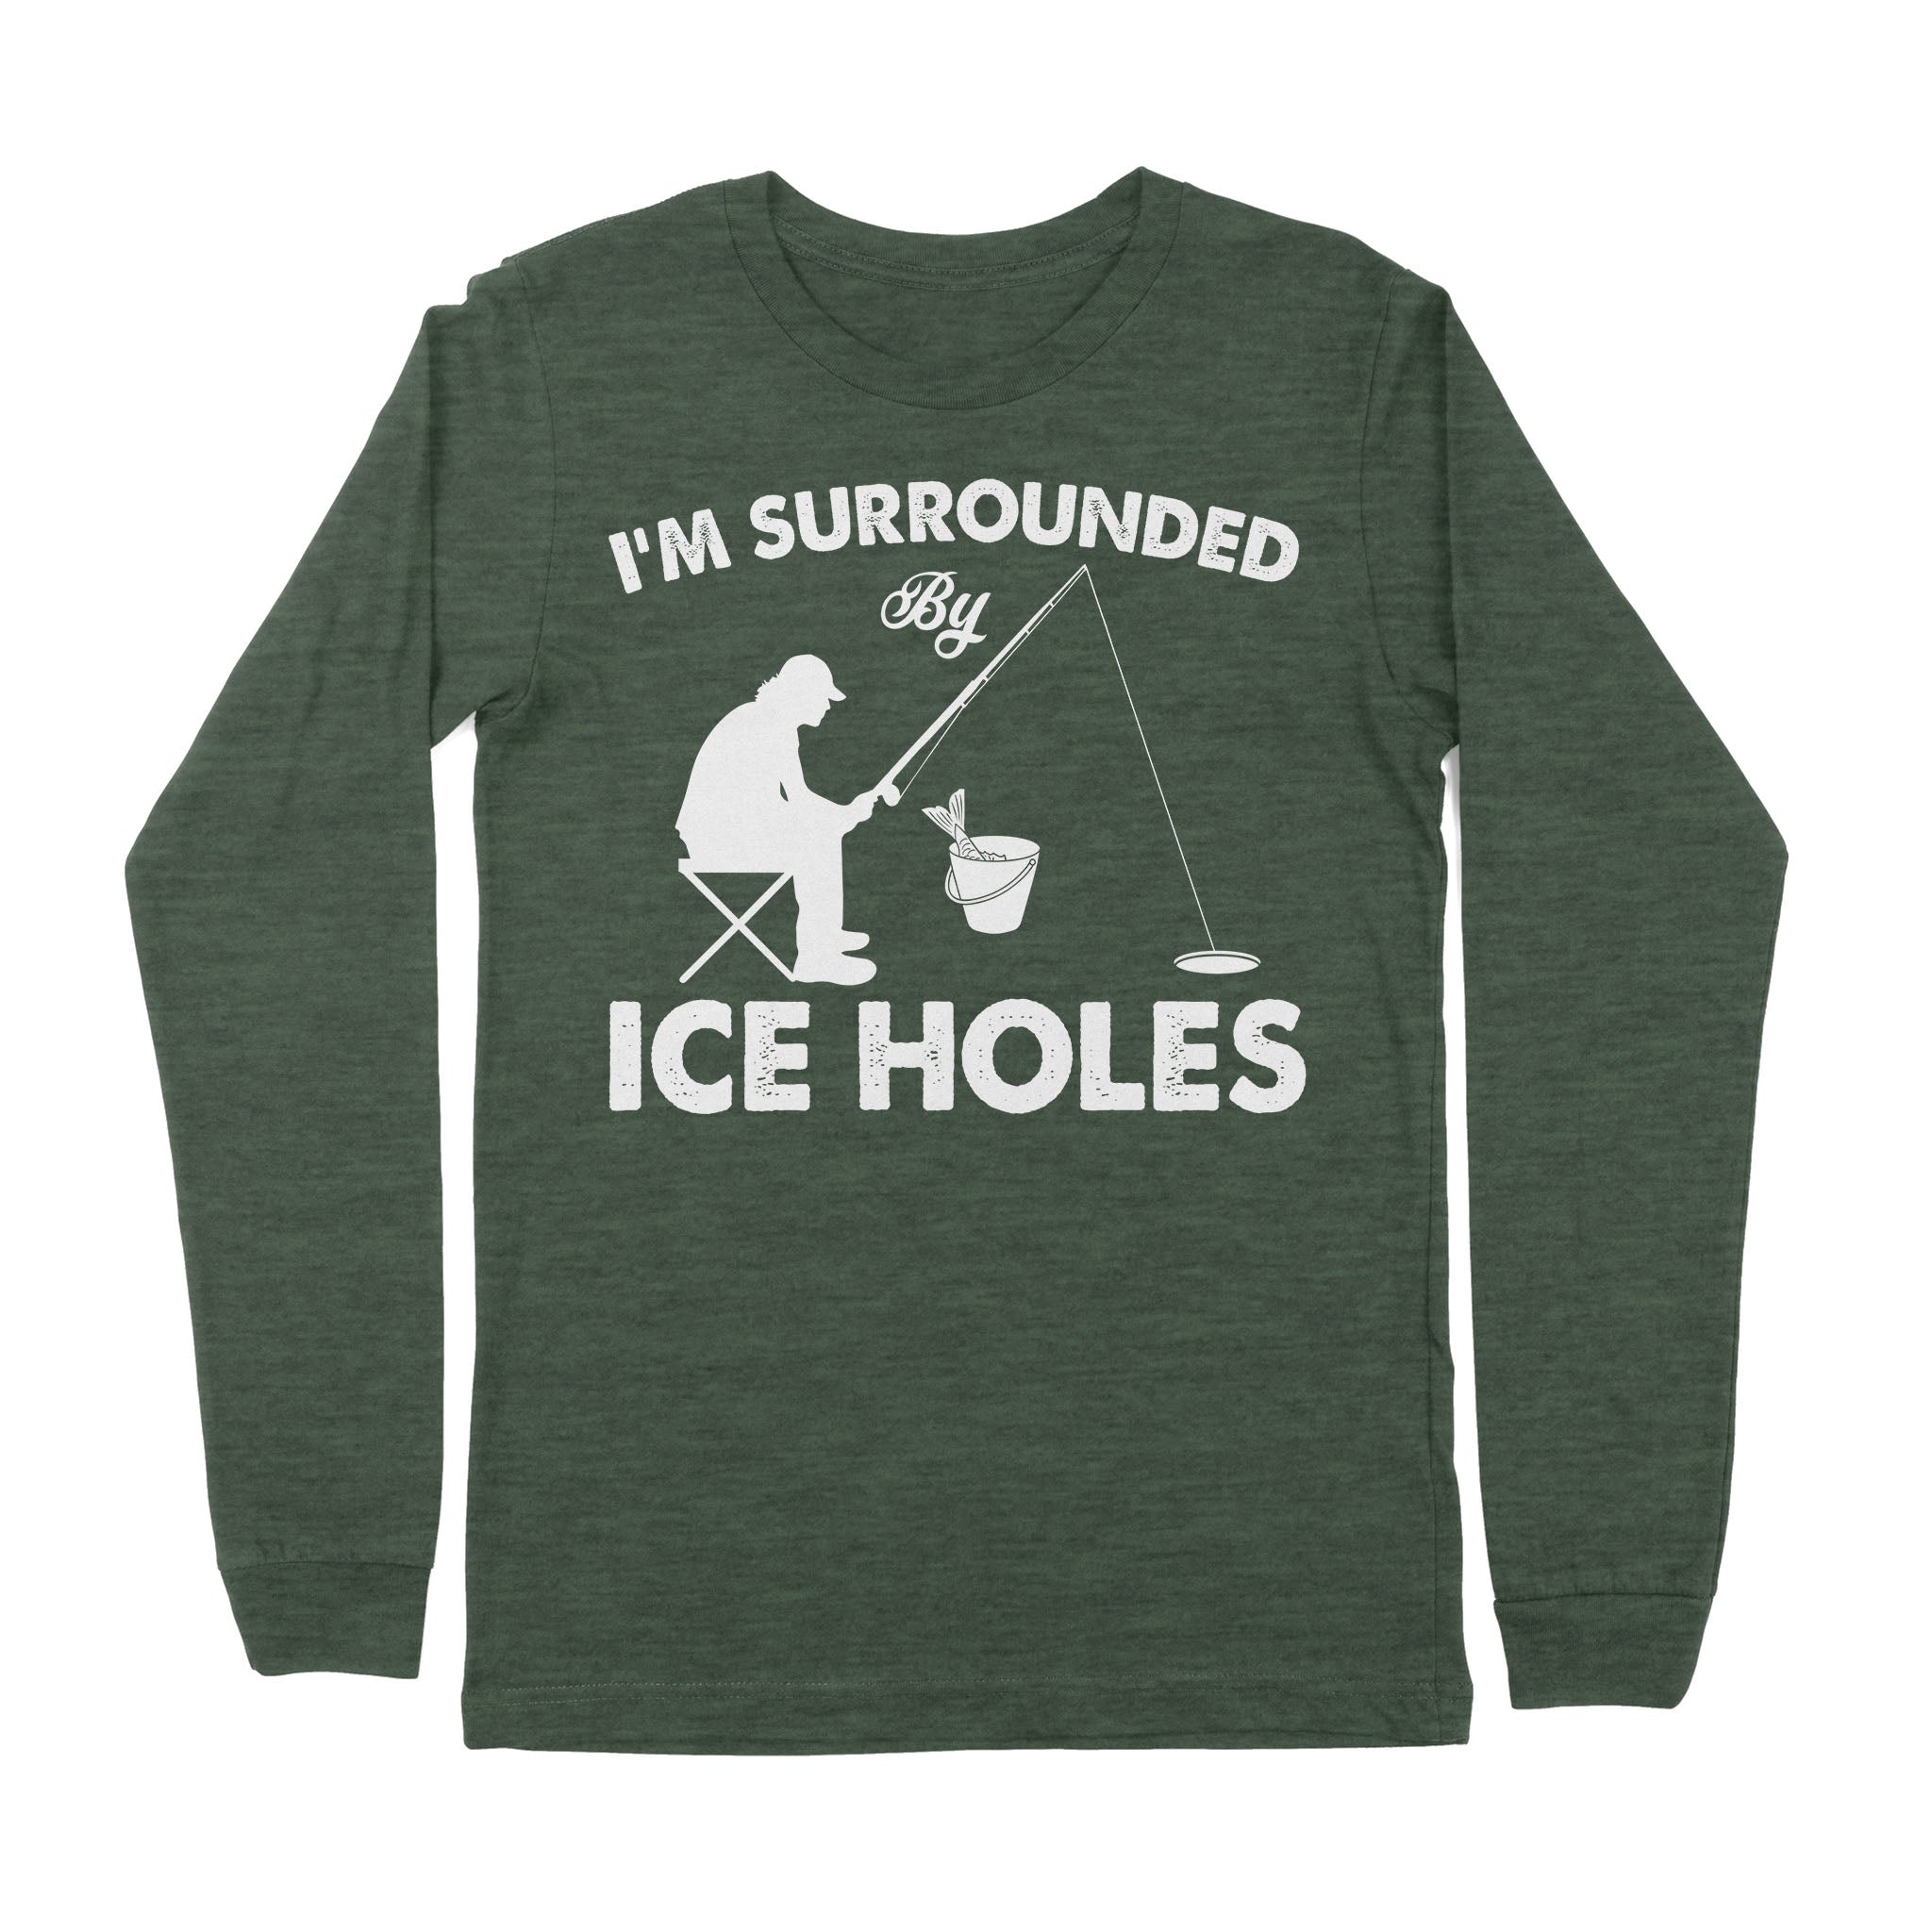 I'm surrounded by ice holes, funny ice fishing shirt D03 NPQ202 - Prem